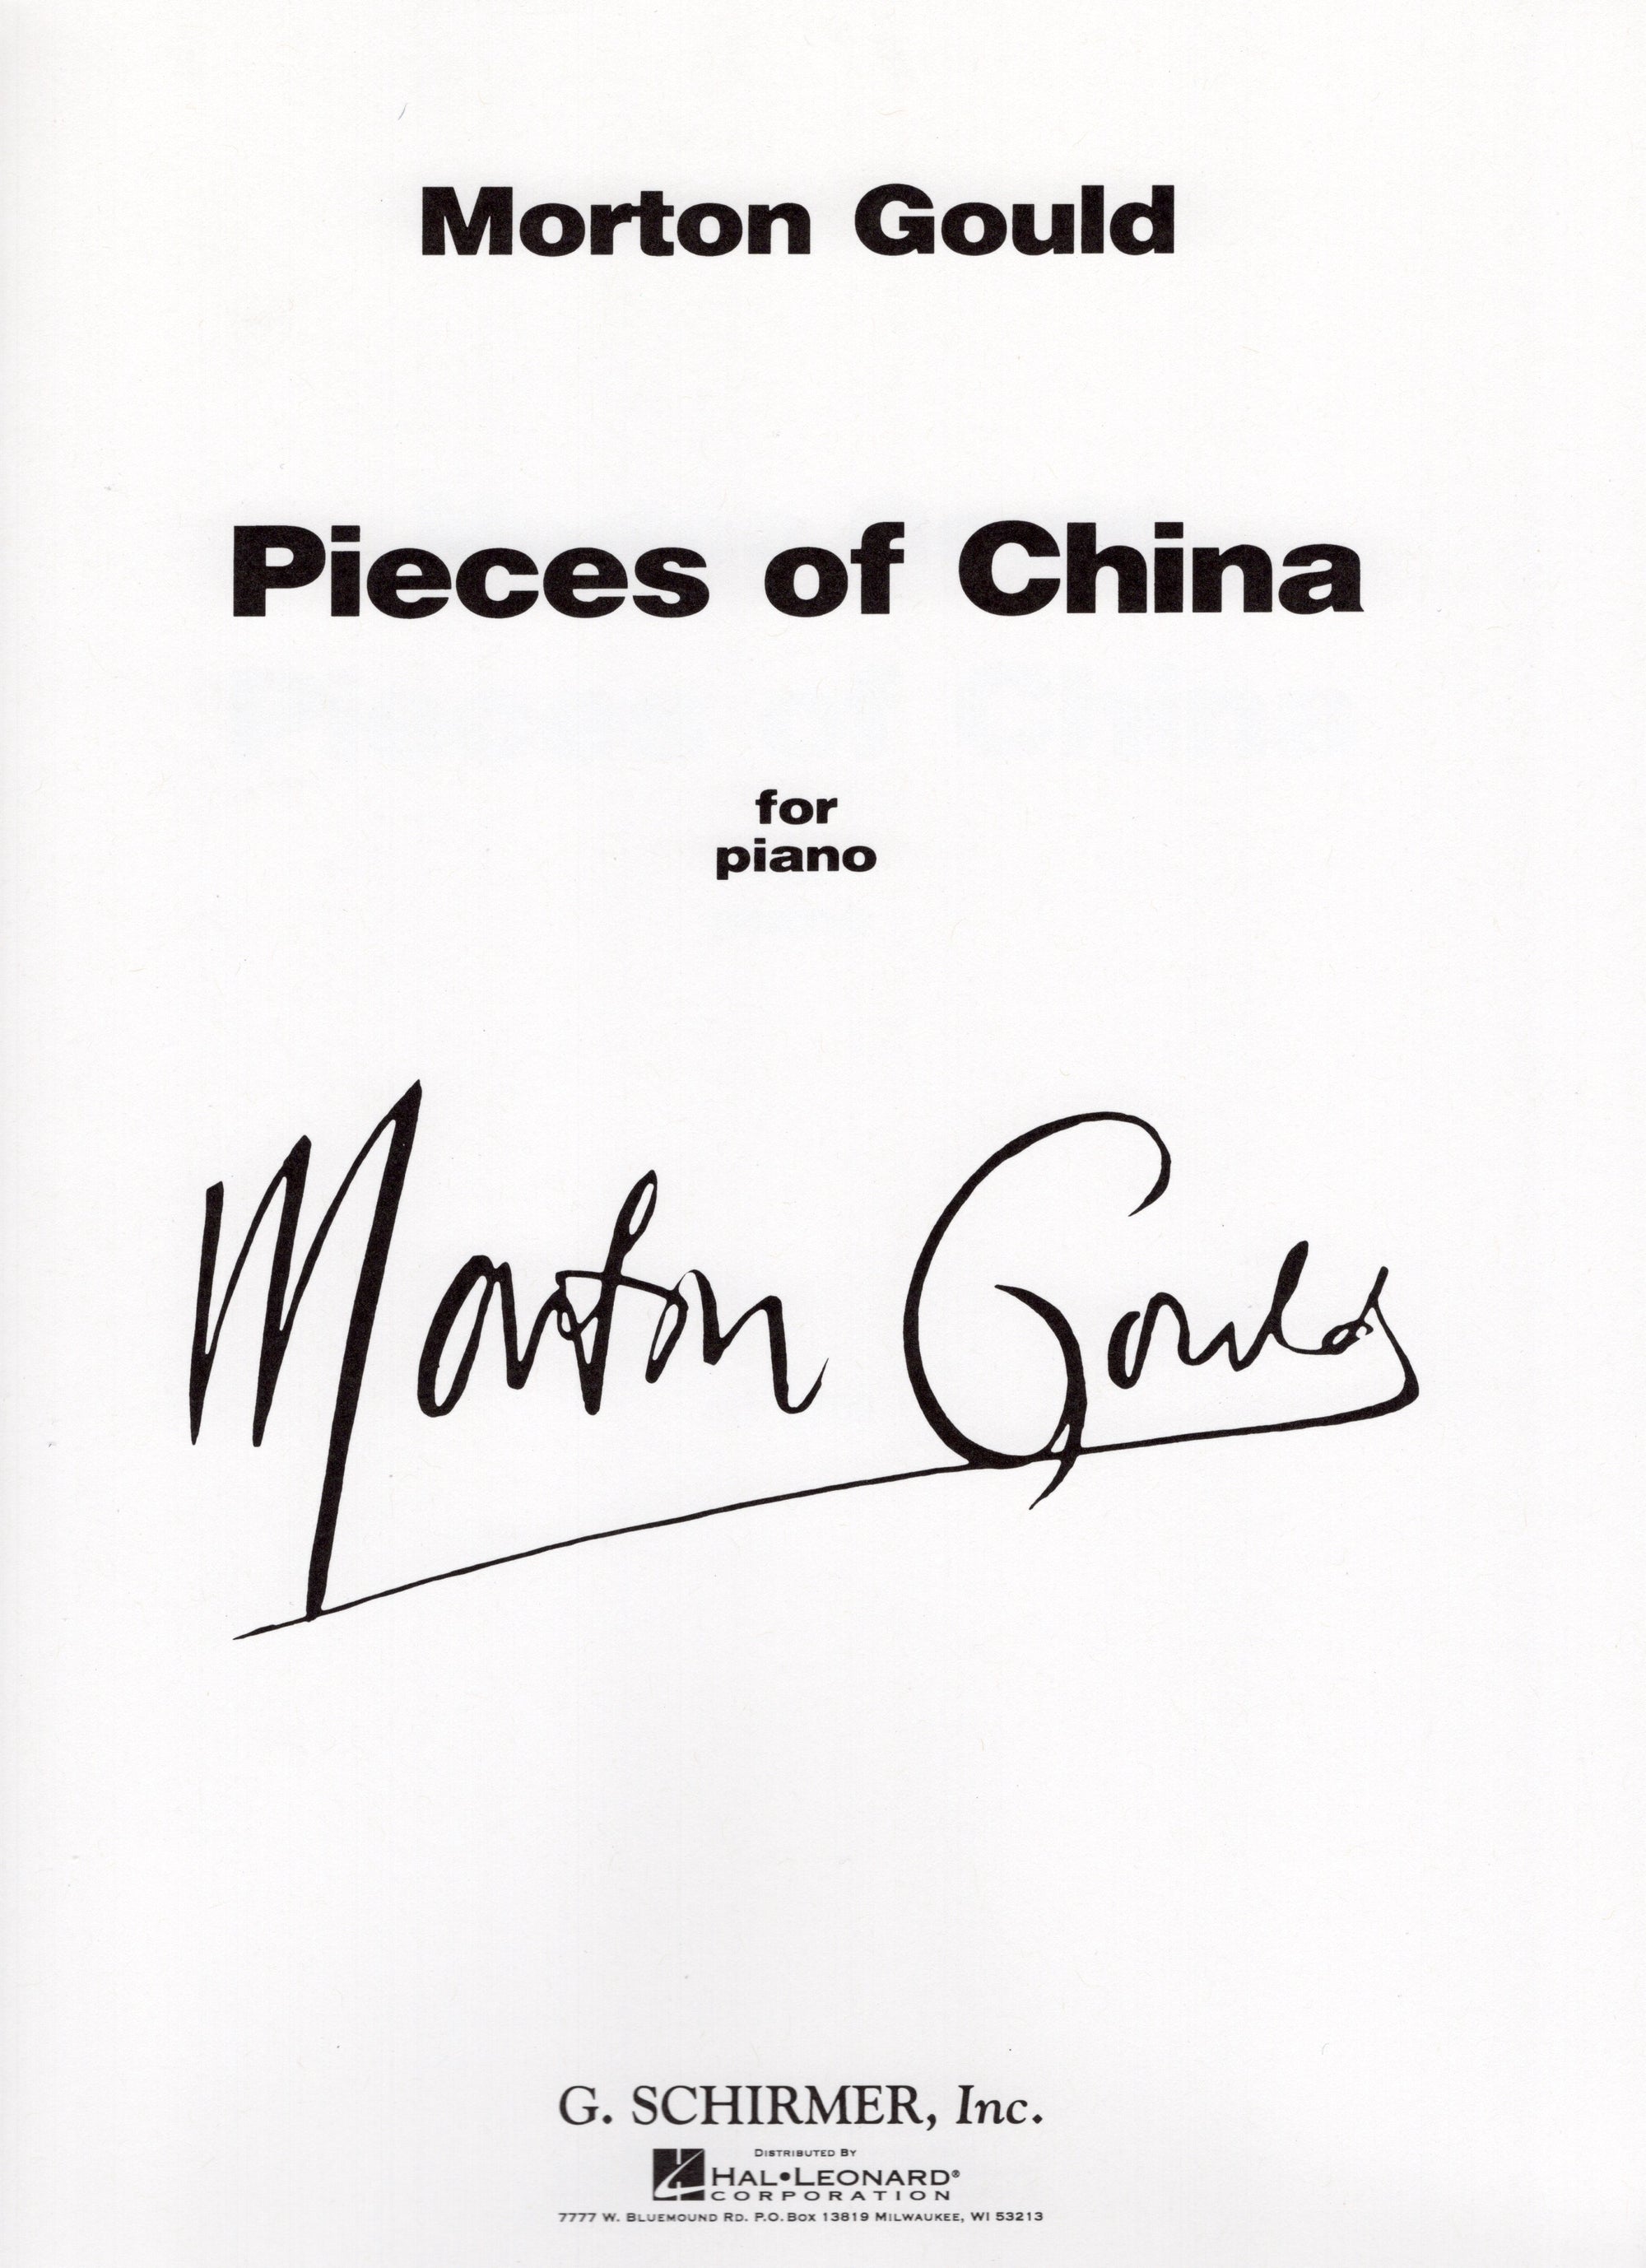 Gould: Pieces of China